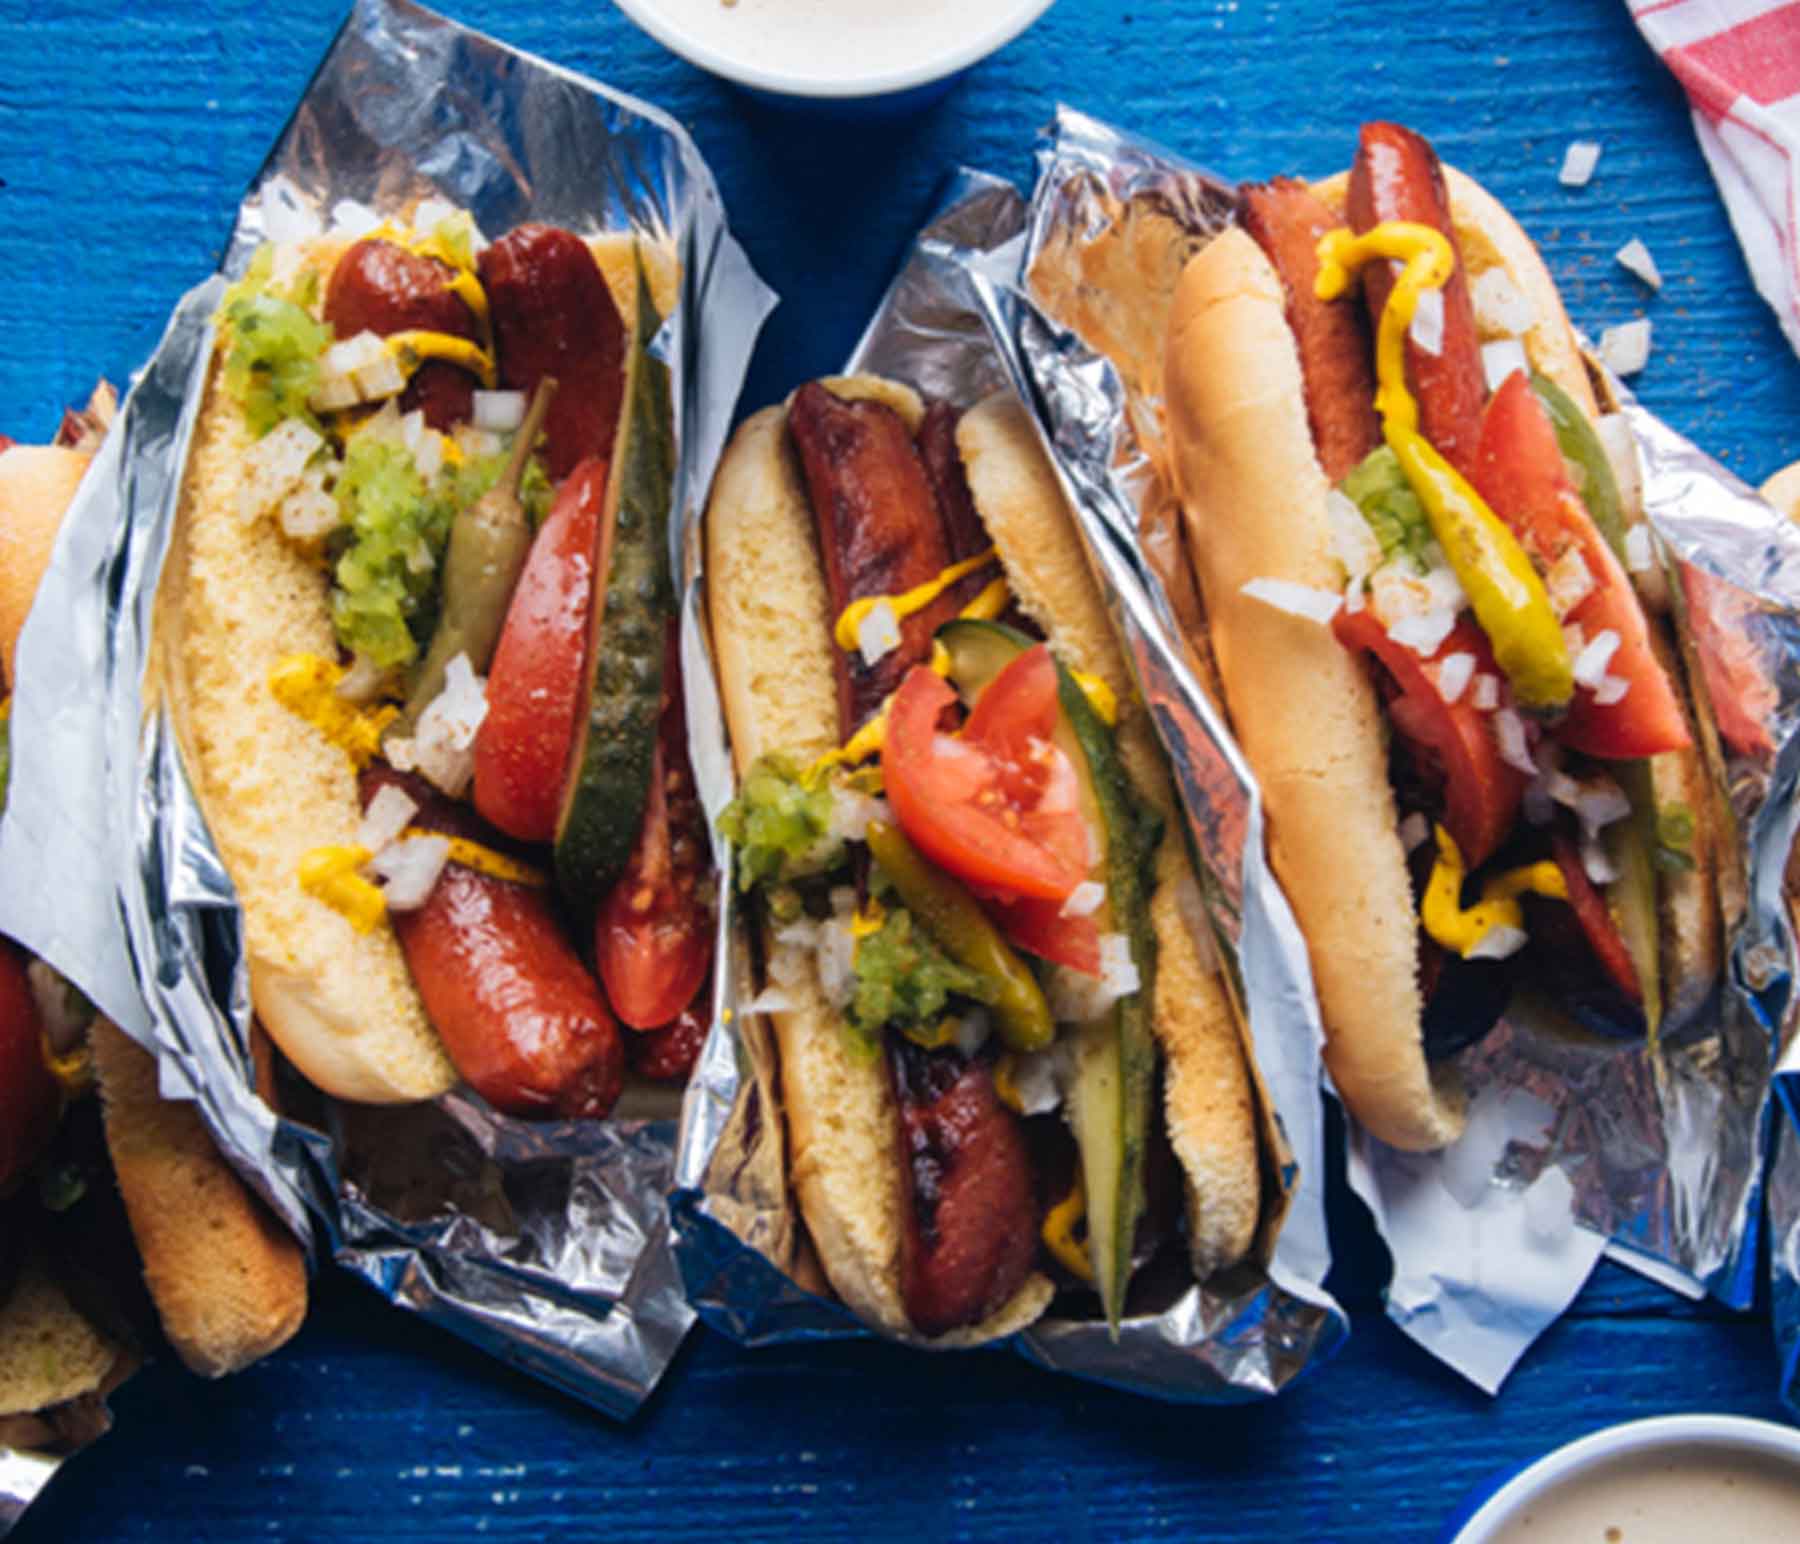 How Long Do You Grill Your Hot Dog?